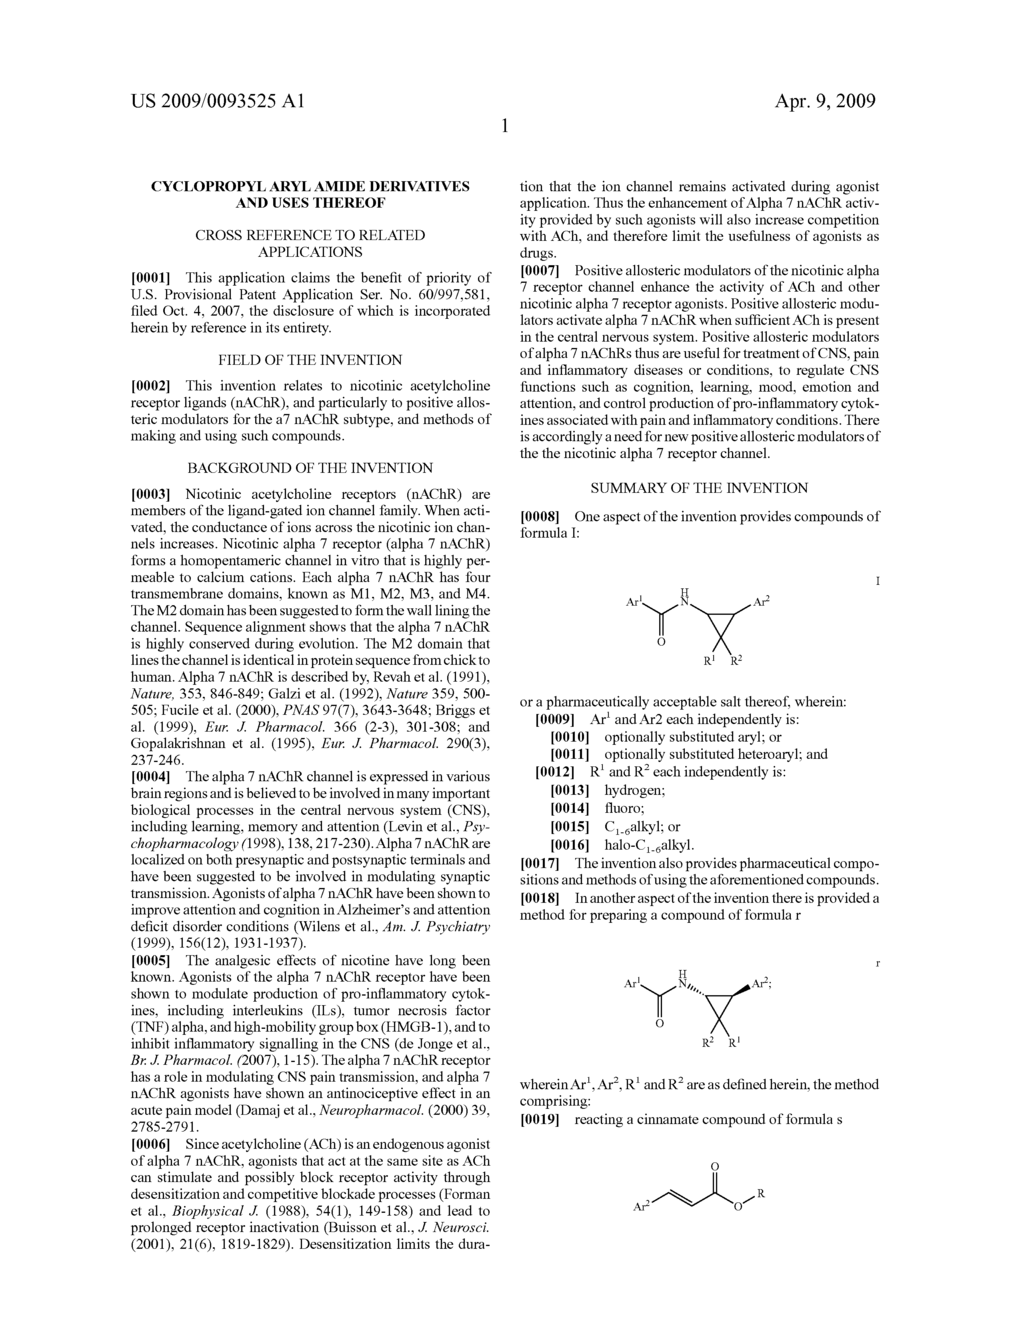 Cyclopropyl aryl amide derivatives and uses thereof - diagram, schematic, and image 02